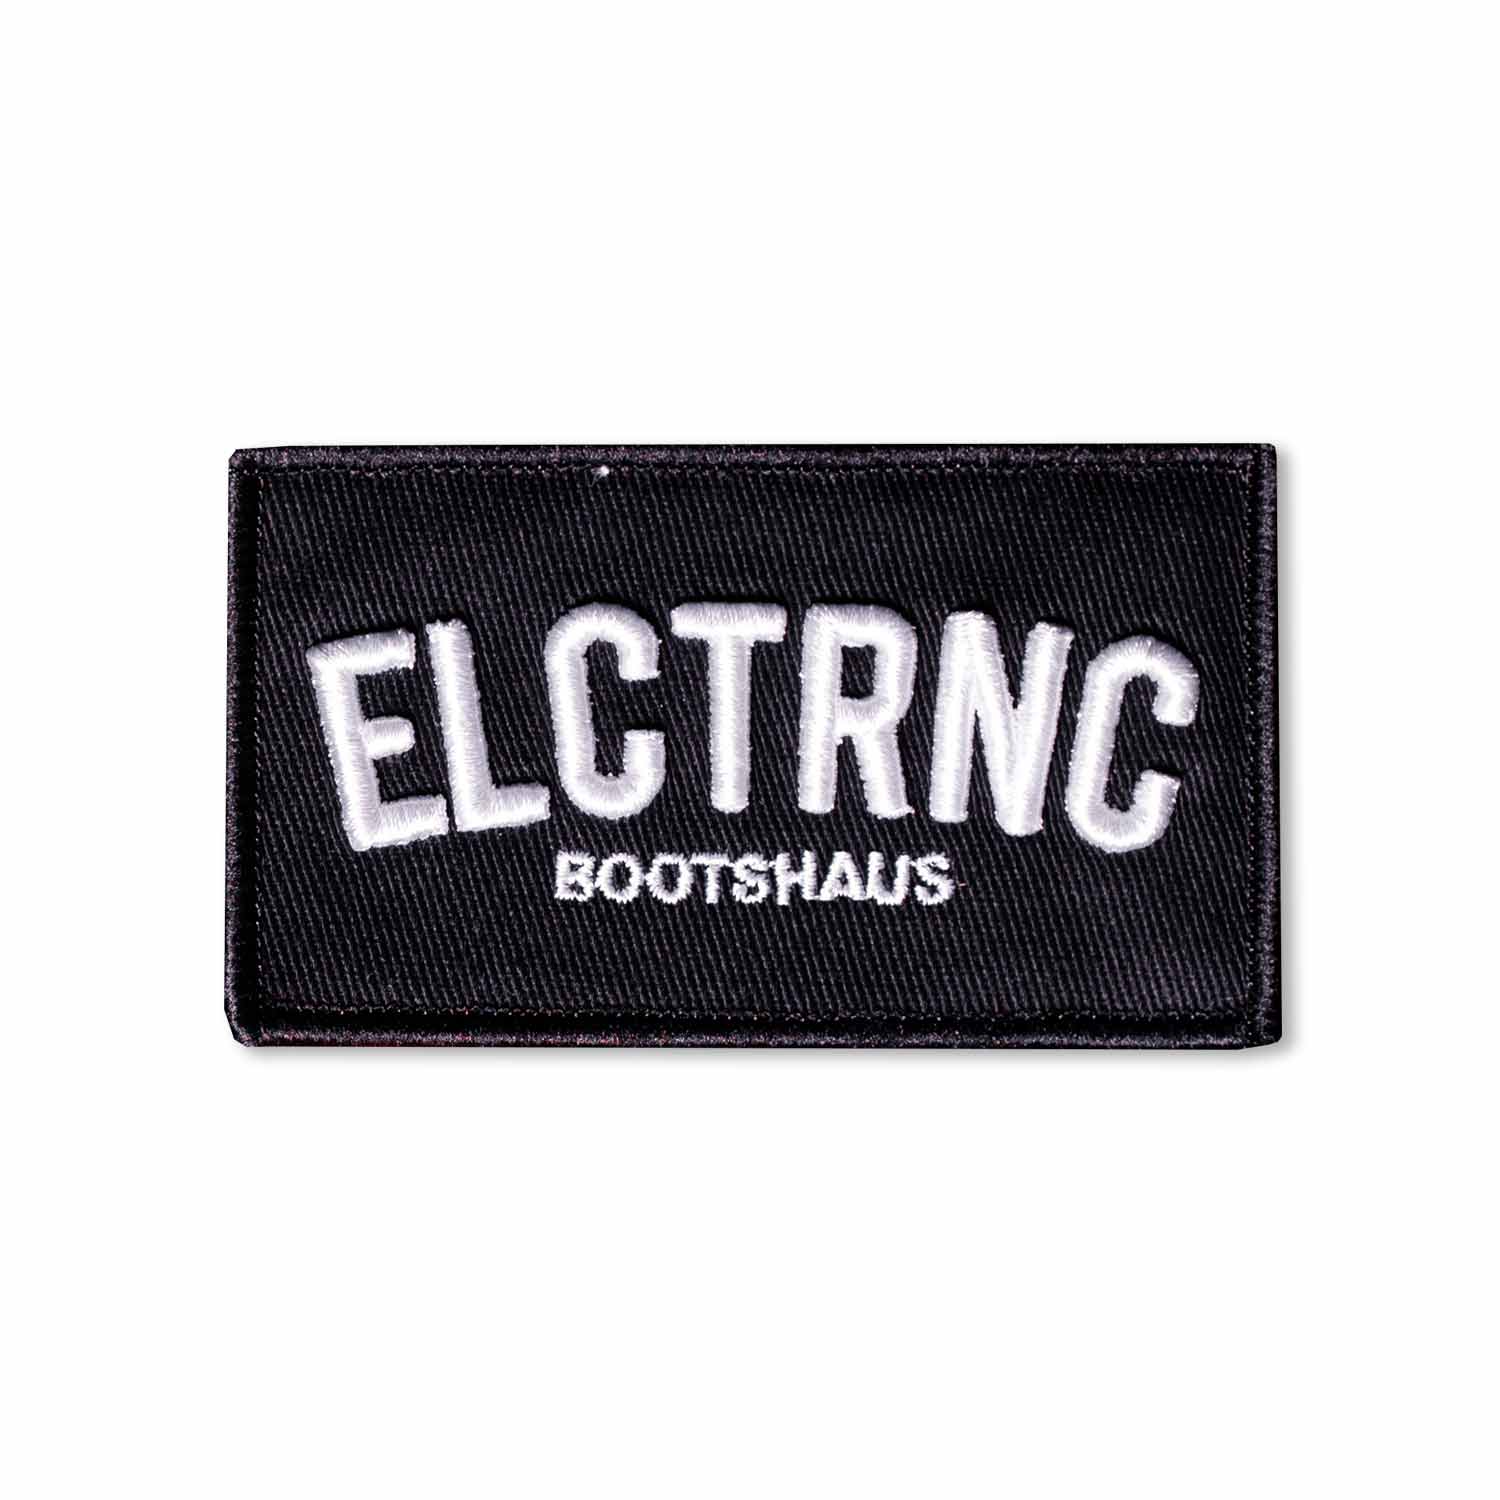 Bootshaus - ELCTRNC Patch